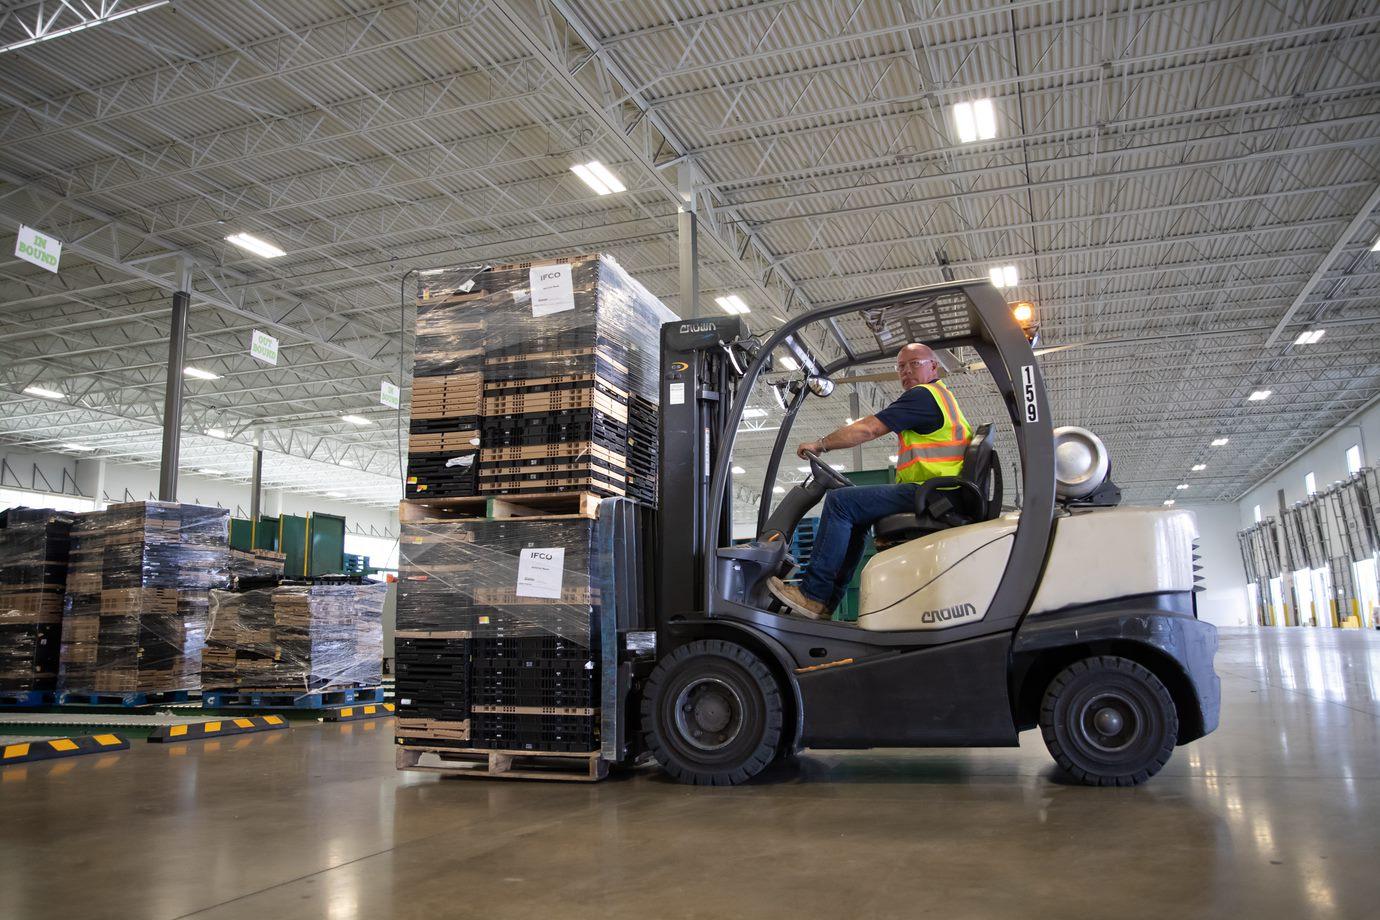 Same-day delivery puts immense pressure on distribution centers